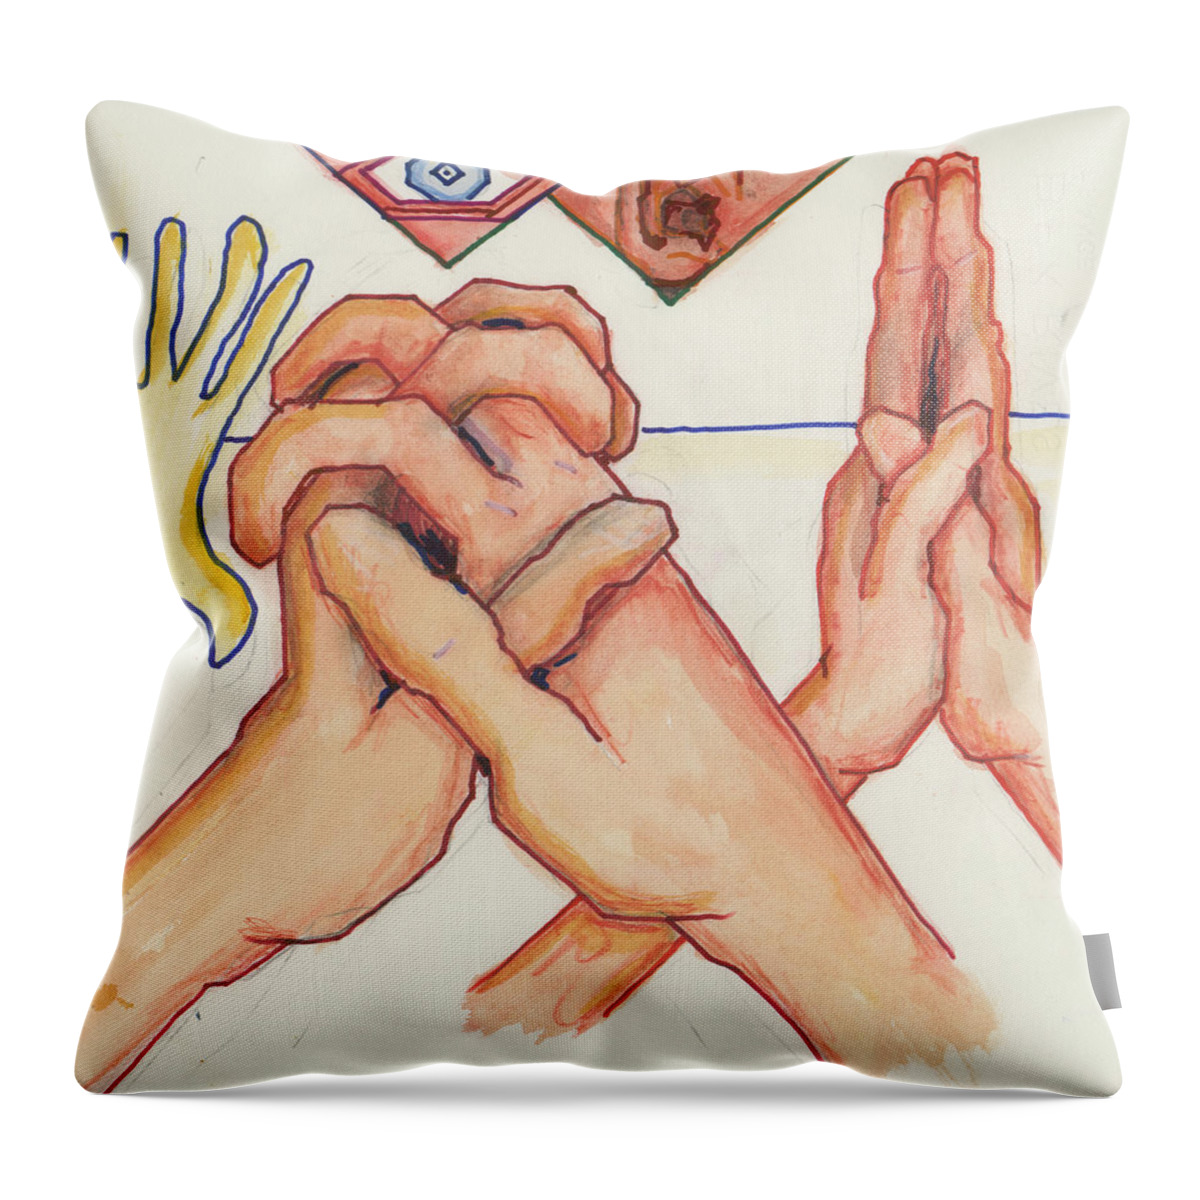 Bible Throw Pillow featuring the painting Esra Jeremias - THE WIEDMANN BIBLE page 35 by Willy Wiedmann